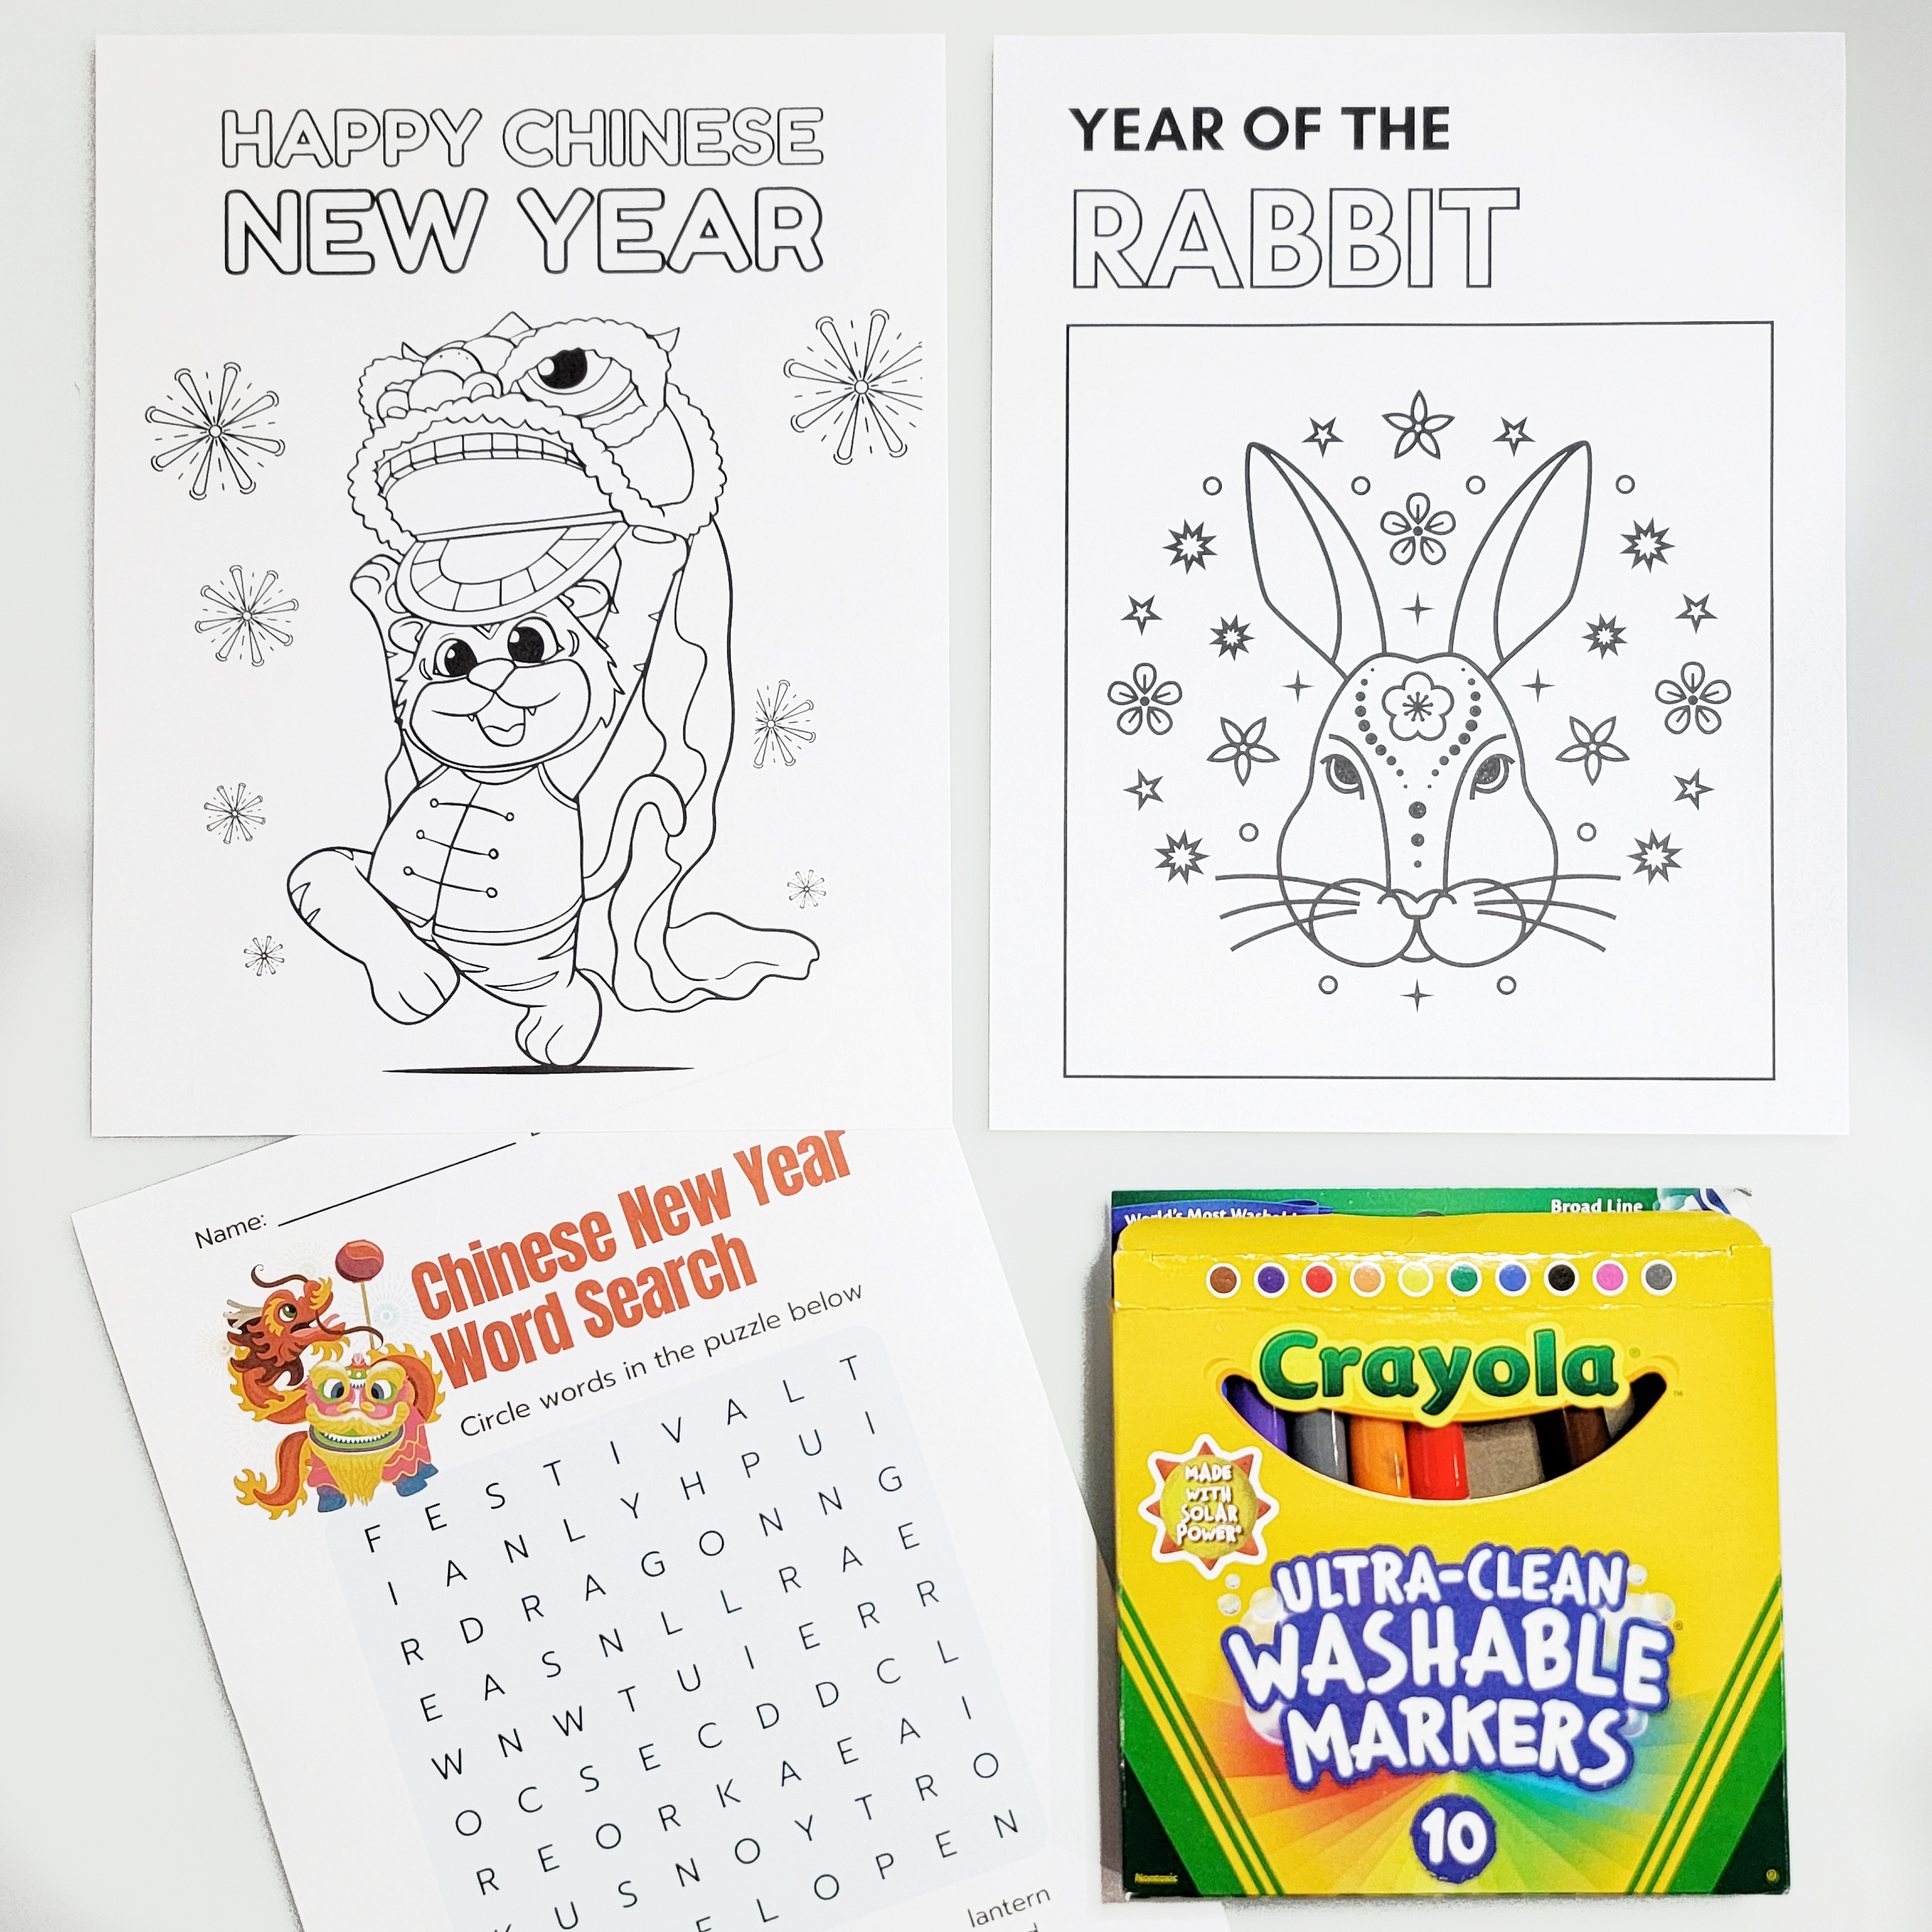 Chinese New Year Coloring Pages - Free & Printable!